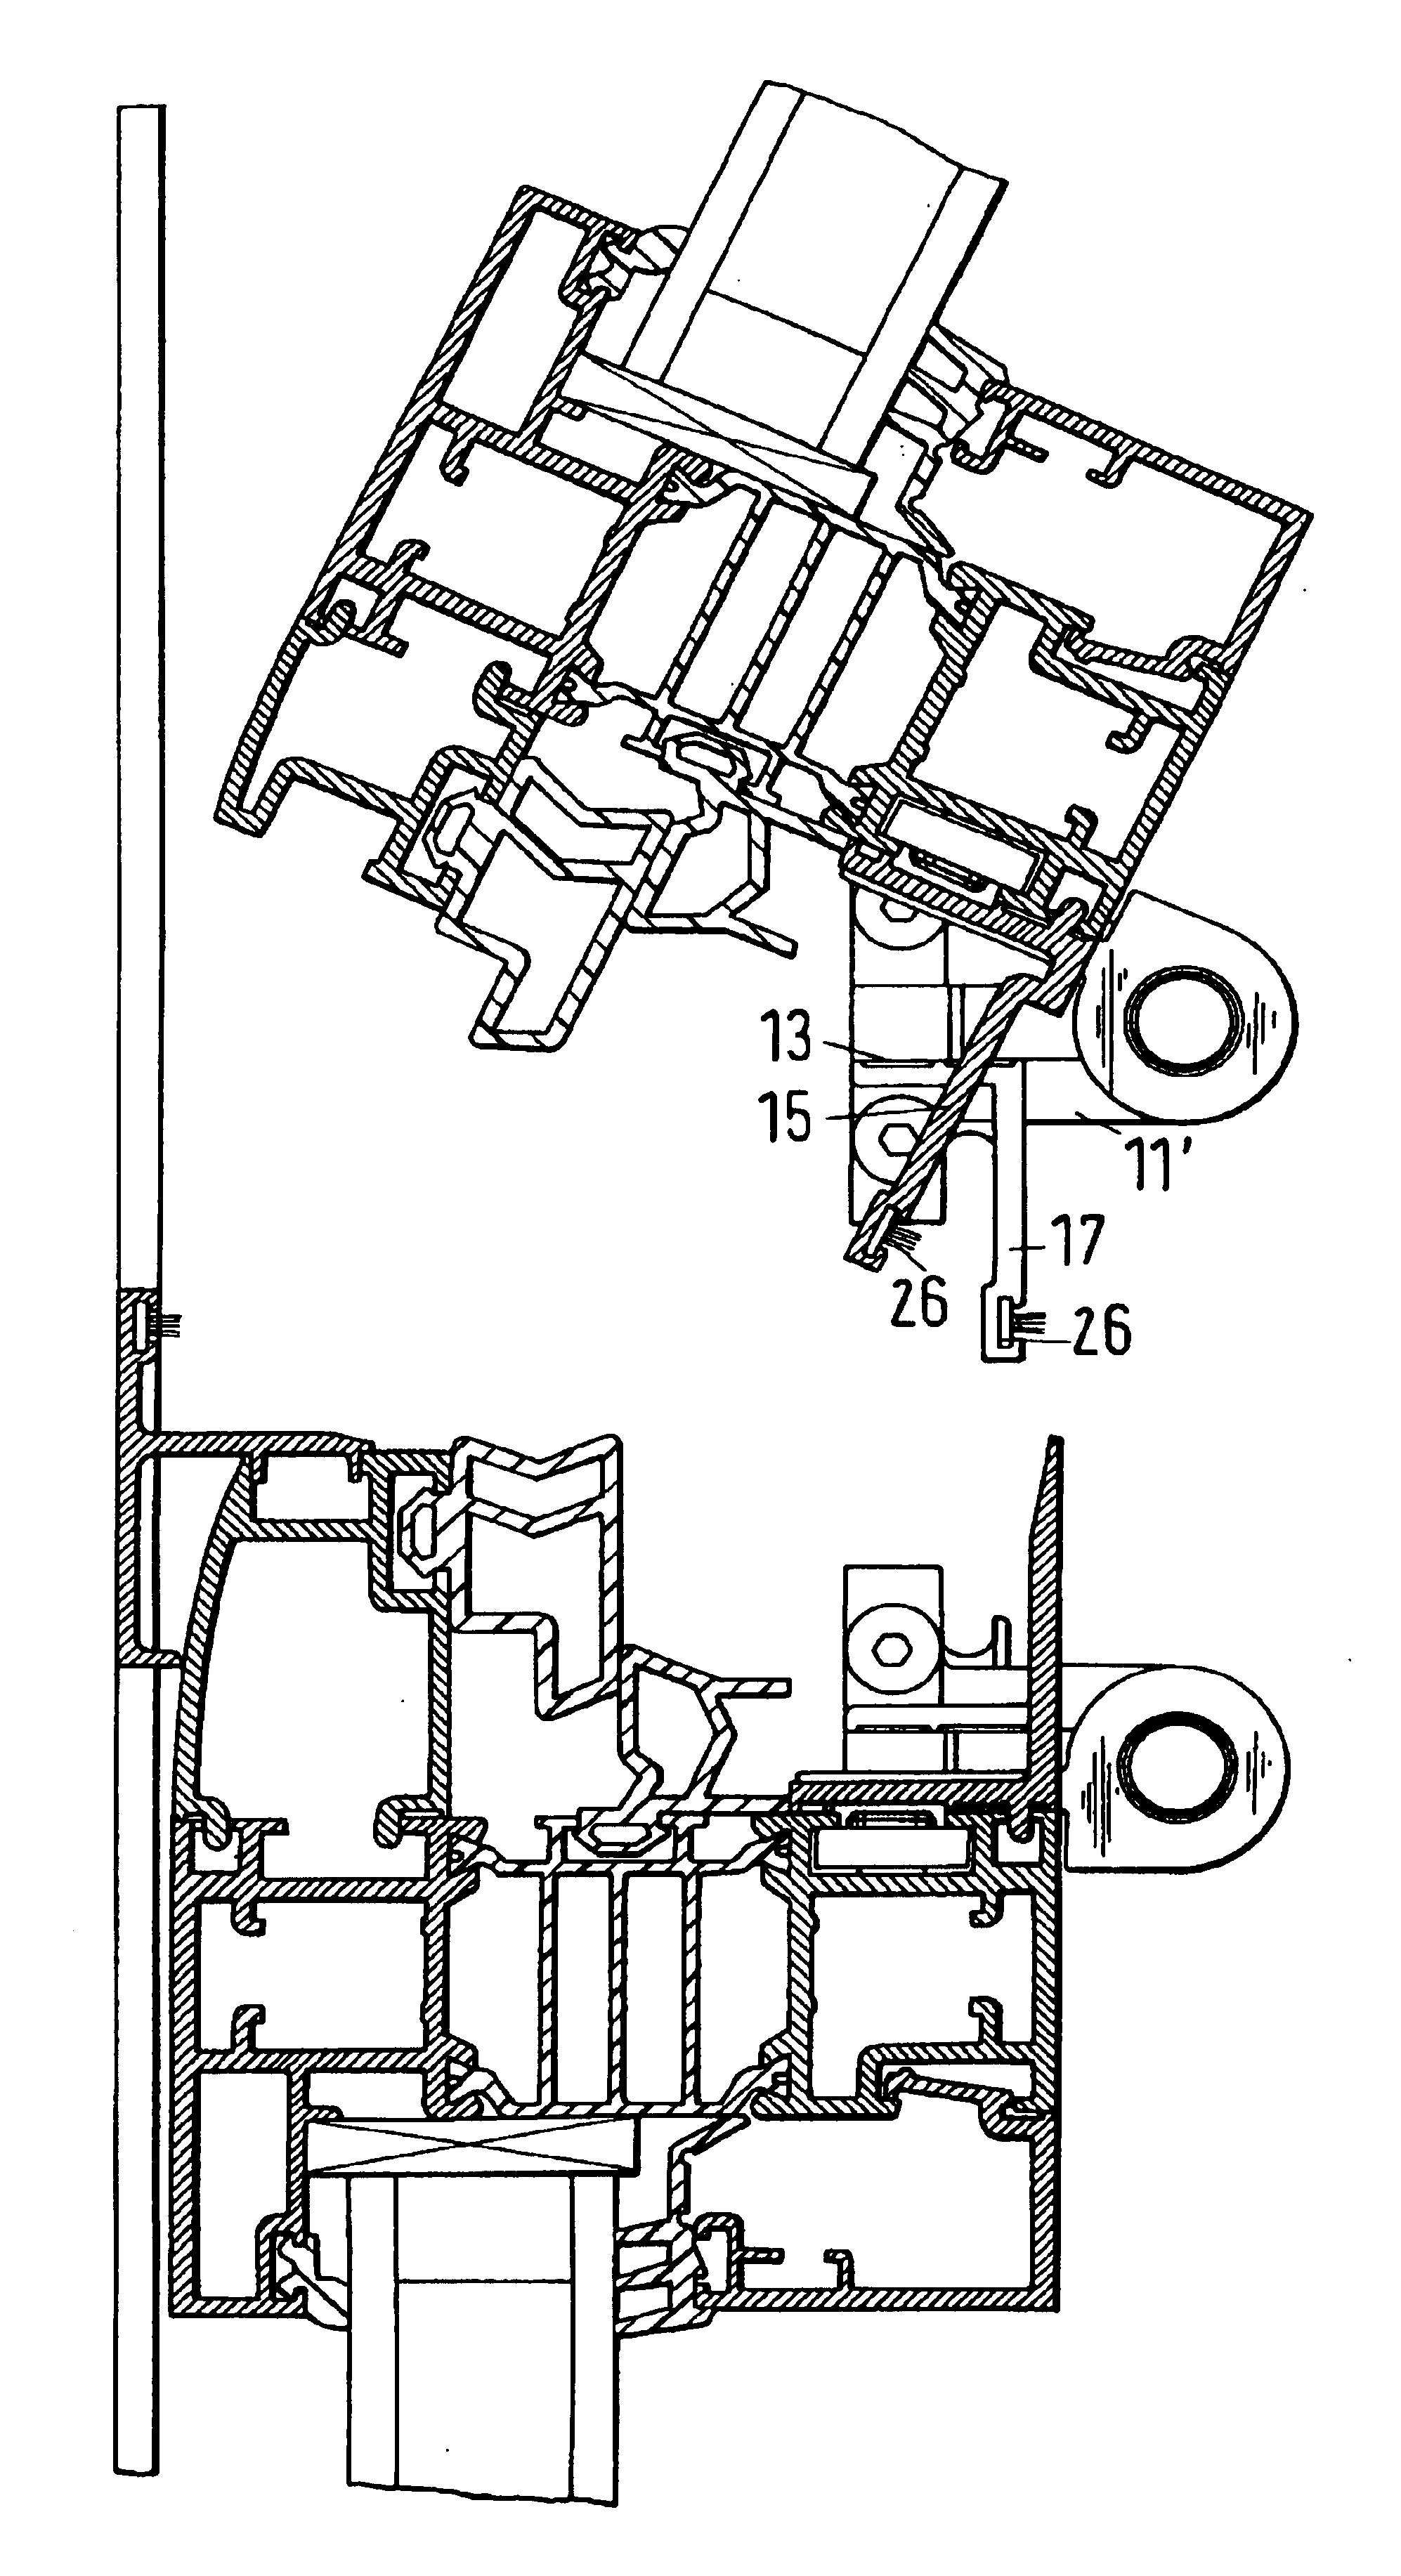 Folding device as room divider or room closure